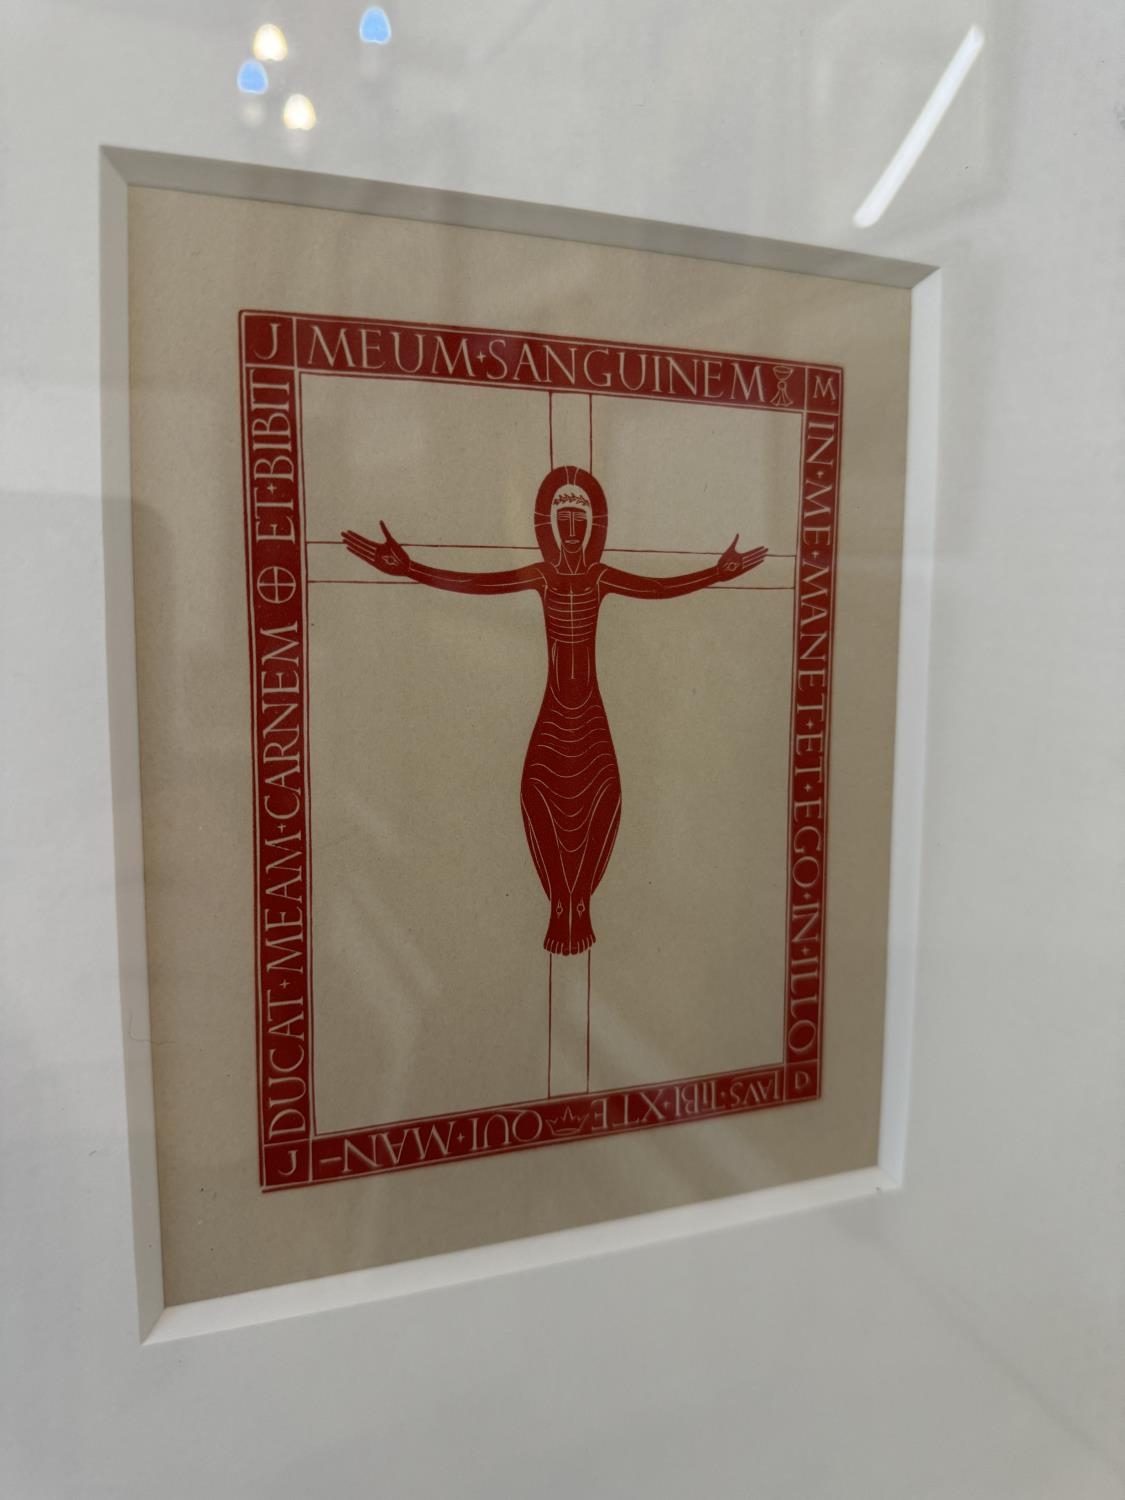 Eric Gill (British, 1882-1940) - 'Crucifix' (1919), woodblock engraving, mounting dimensions: 13 x - Image 3 of 6